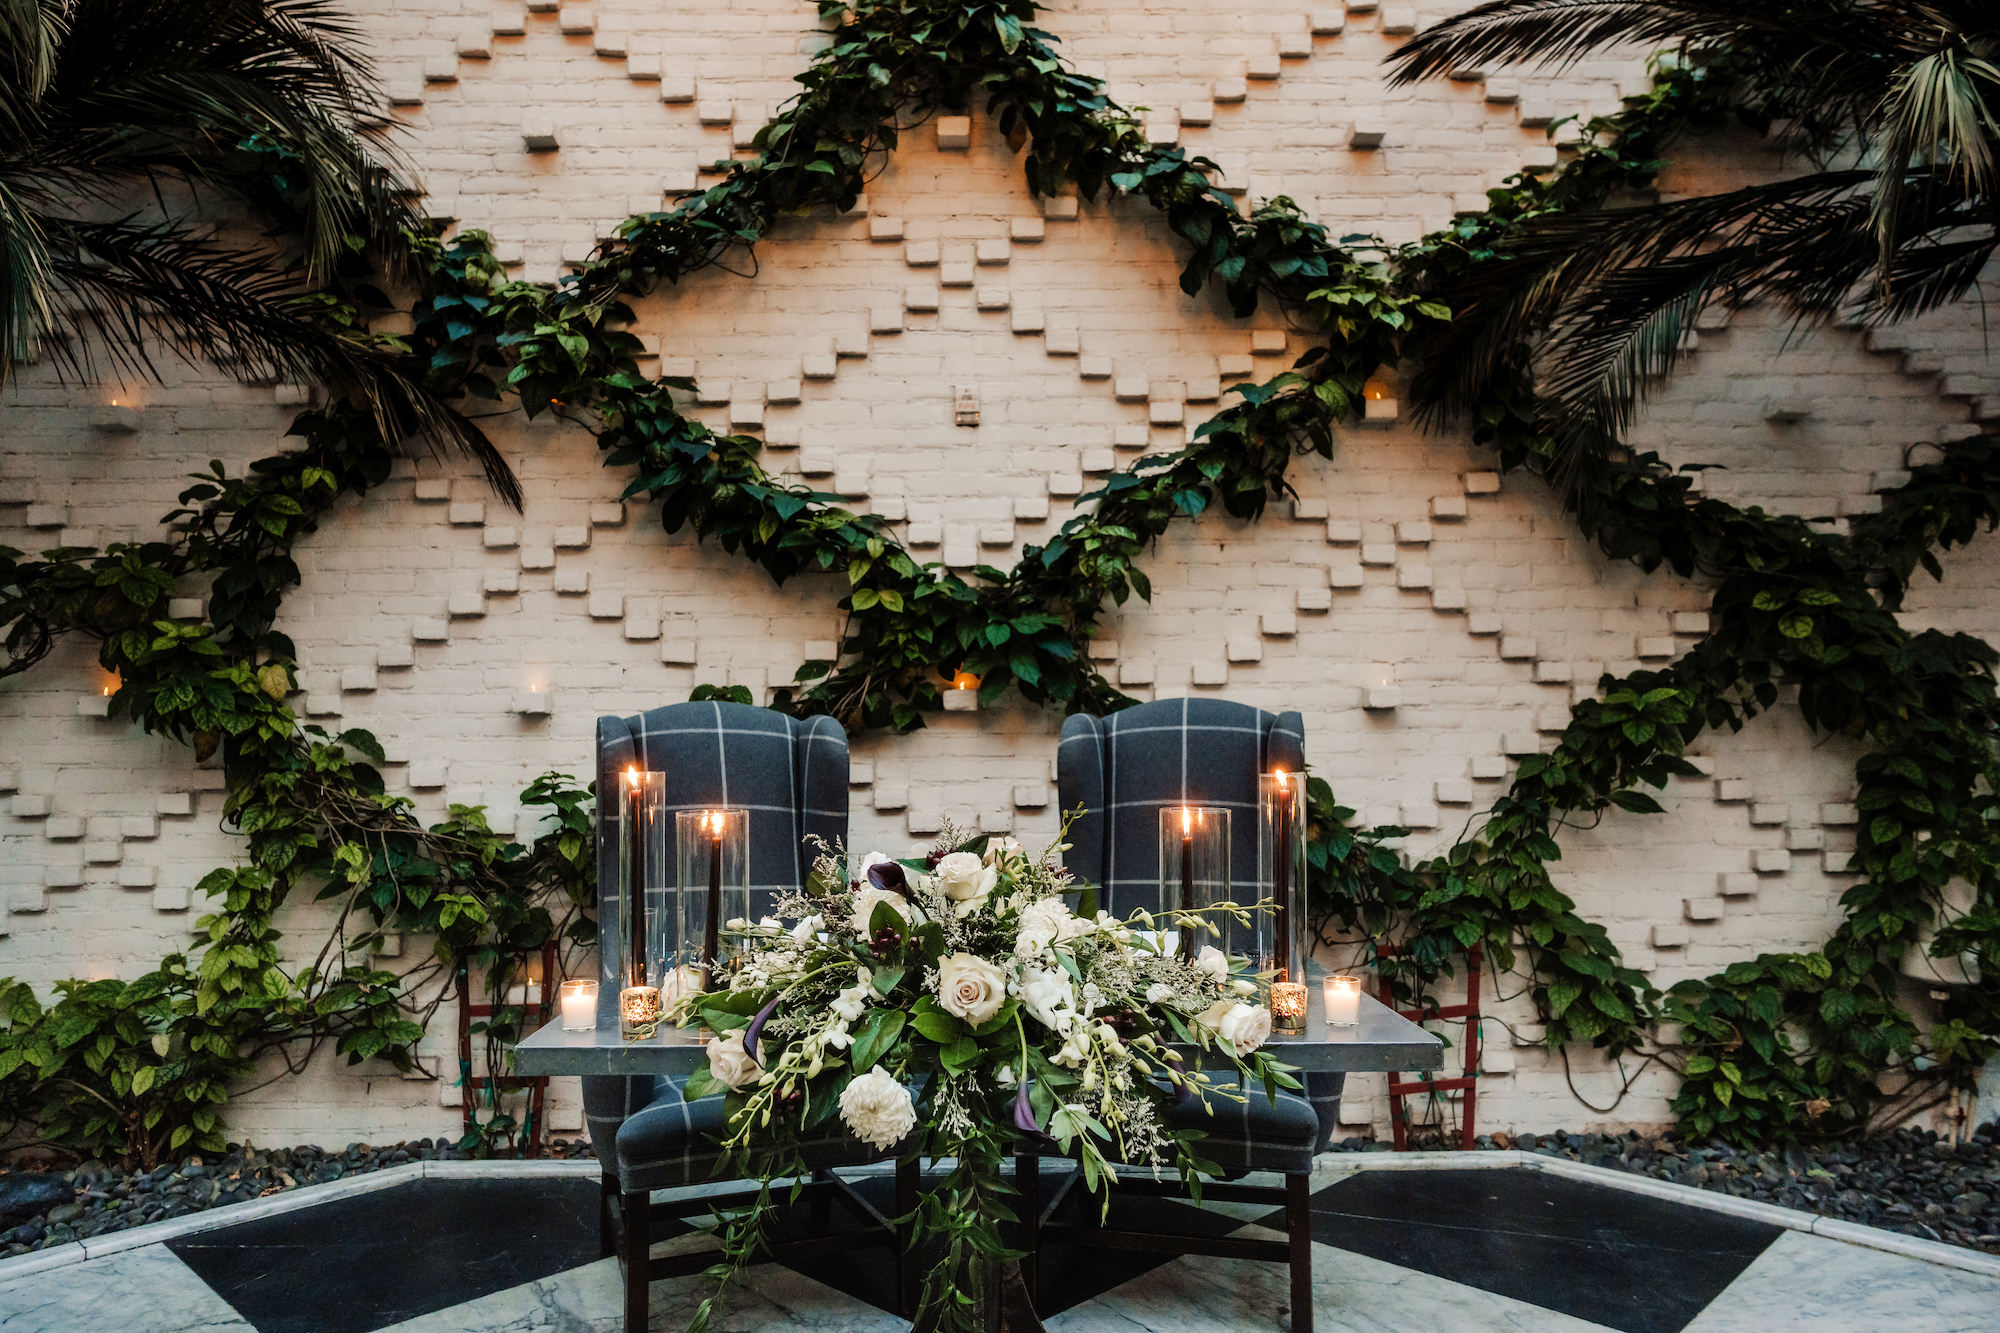 Sweetheart Table with Greenery and White Florals, Black Candles and Upholstered Chair Wedding Reception Inspiration